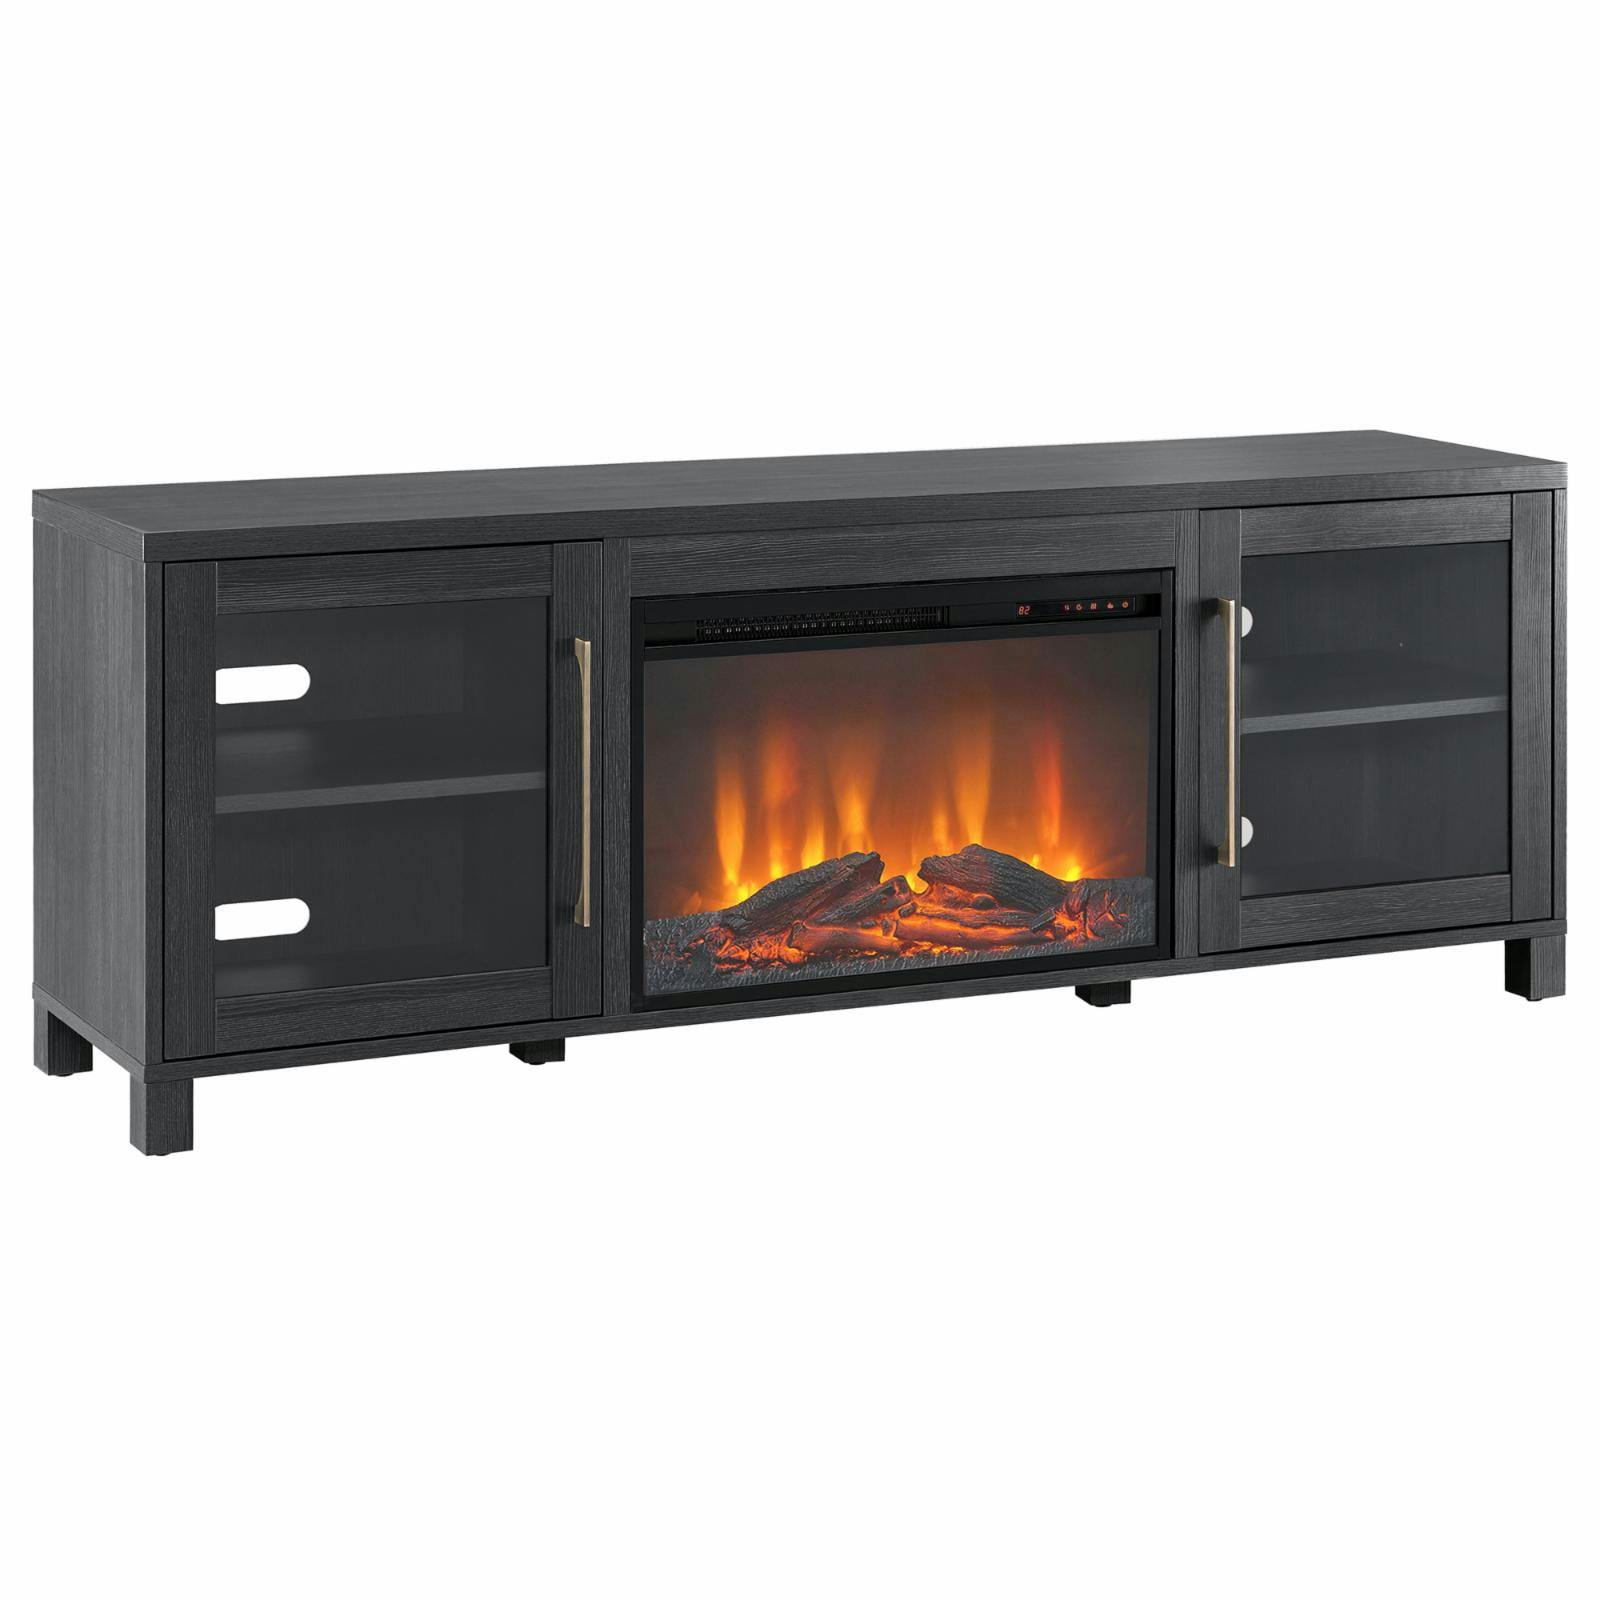 Charcoal Gray Freestanding TV Stand with Log Fireplace and Storage